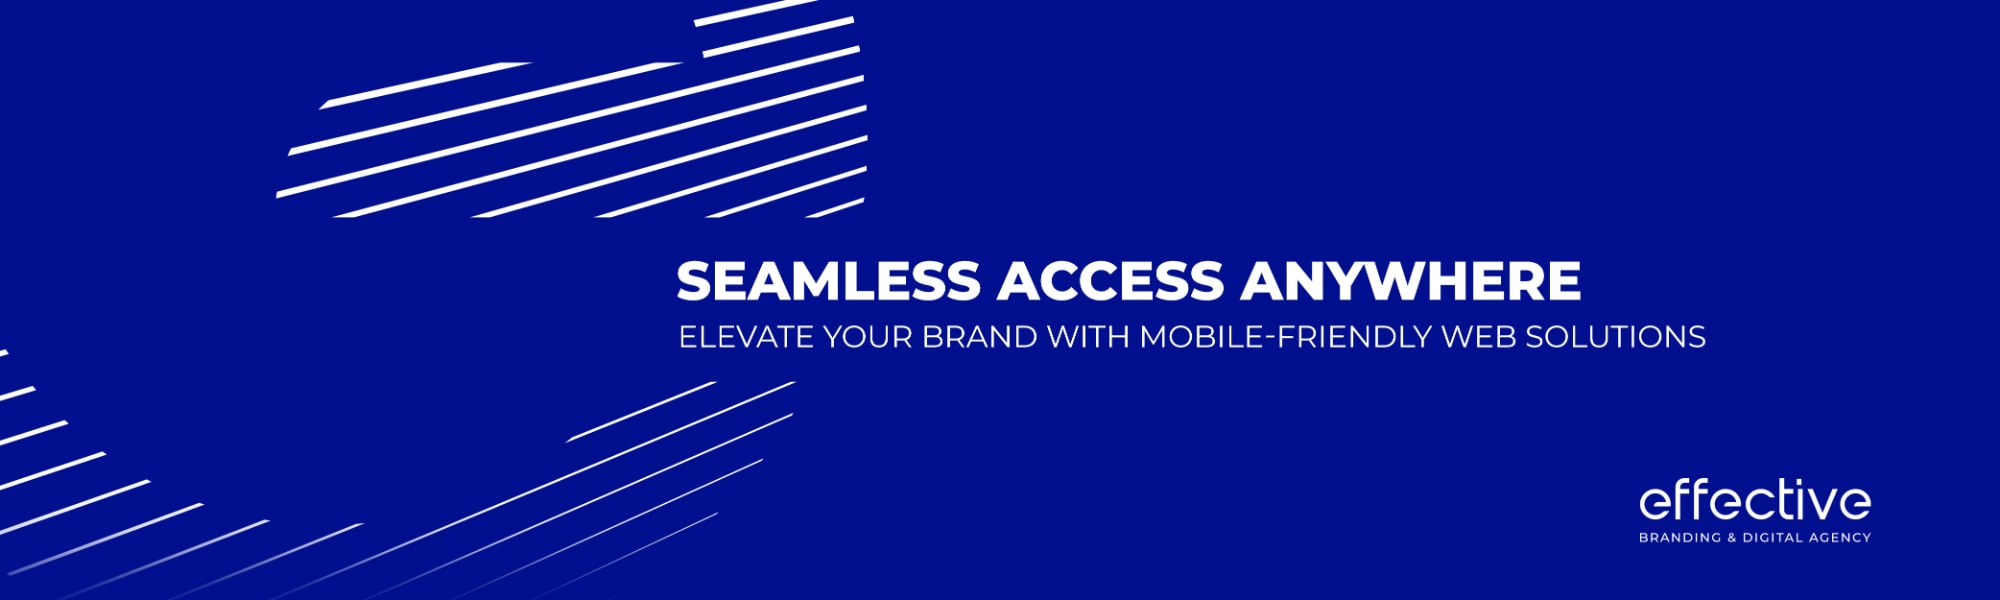 Seamless Access Anywhere Elevate Your Brand with Mobile Friendly Web Solutions